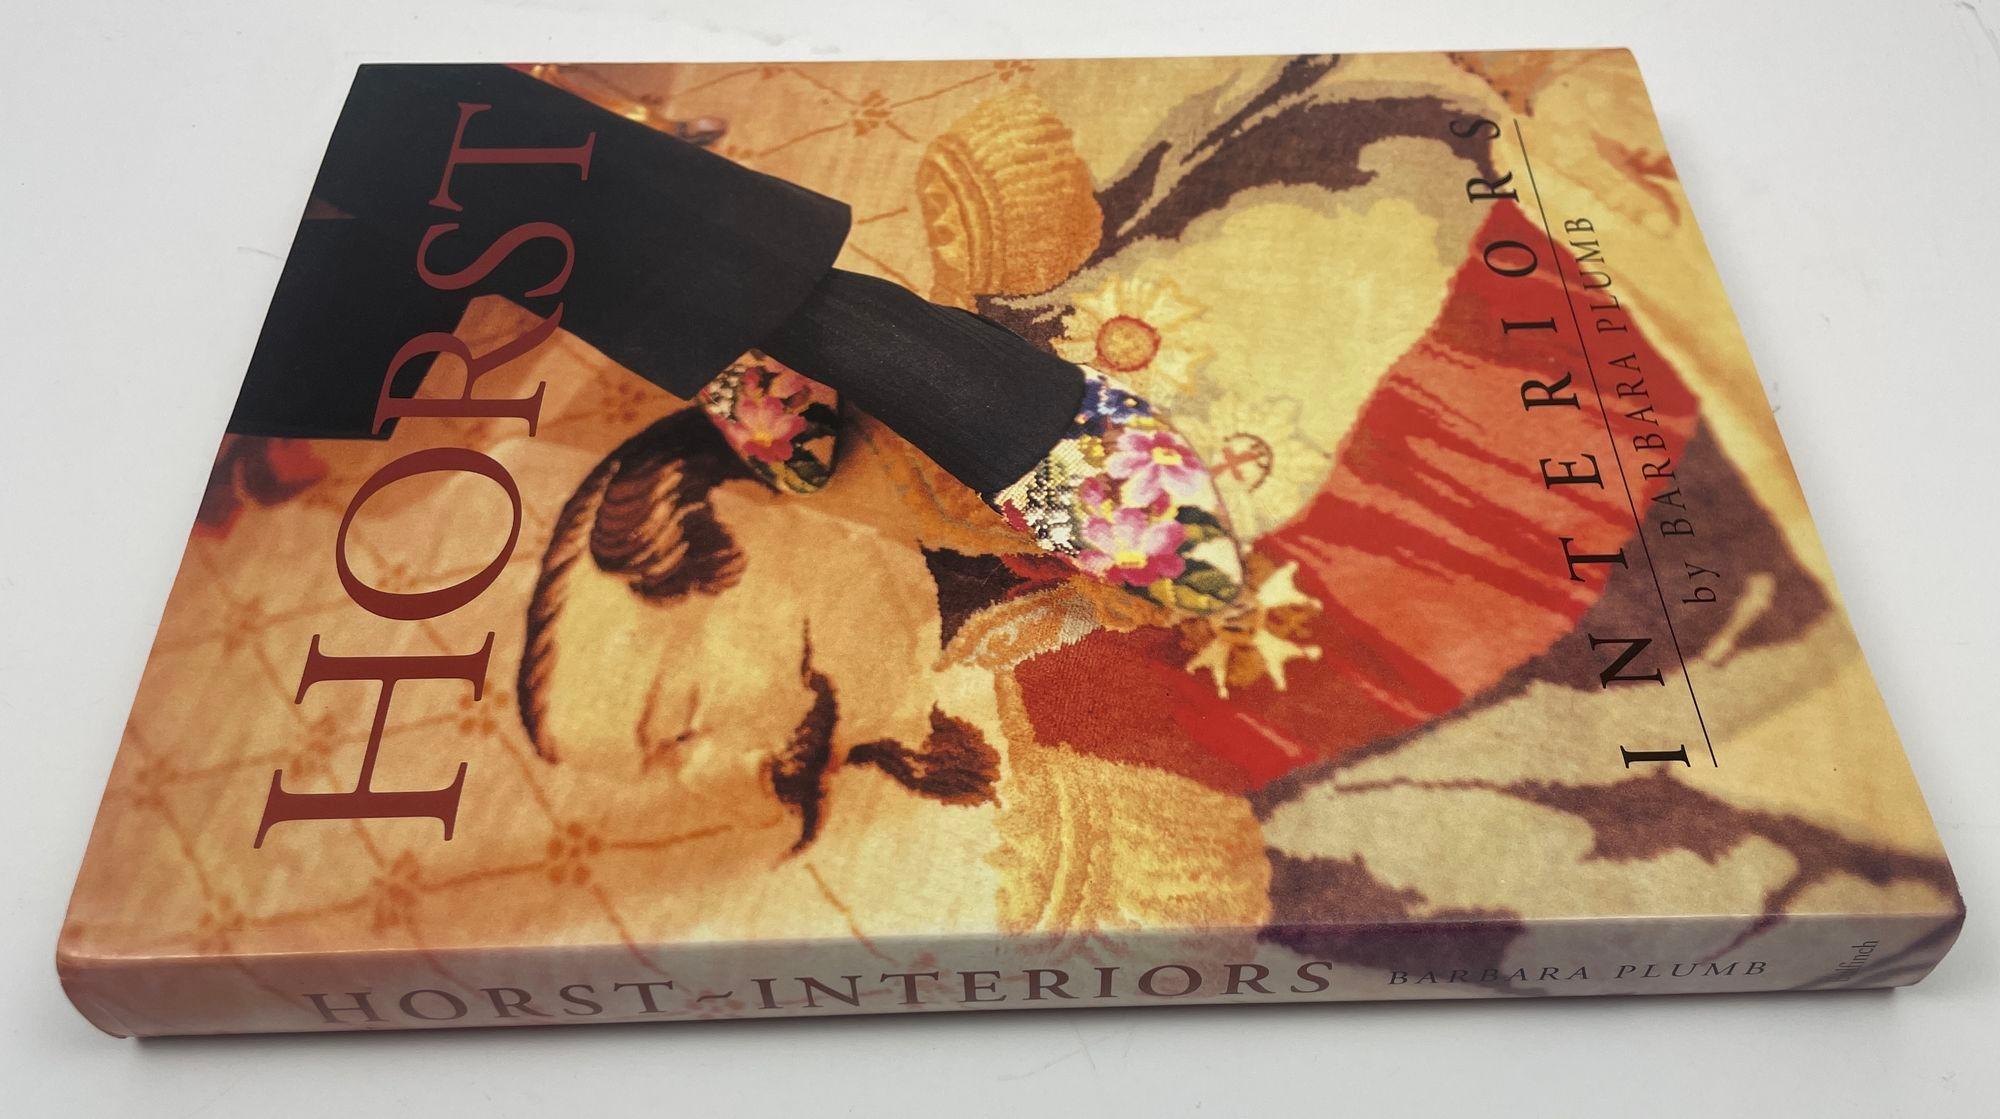 American Classical Horst Interiors by Barbara Plumb Hardcover Book 1993 First Edition For Sale